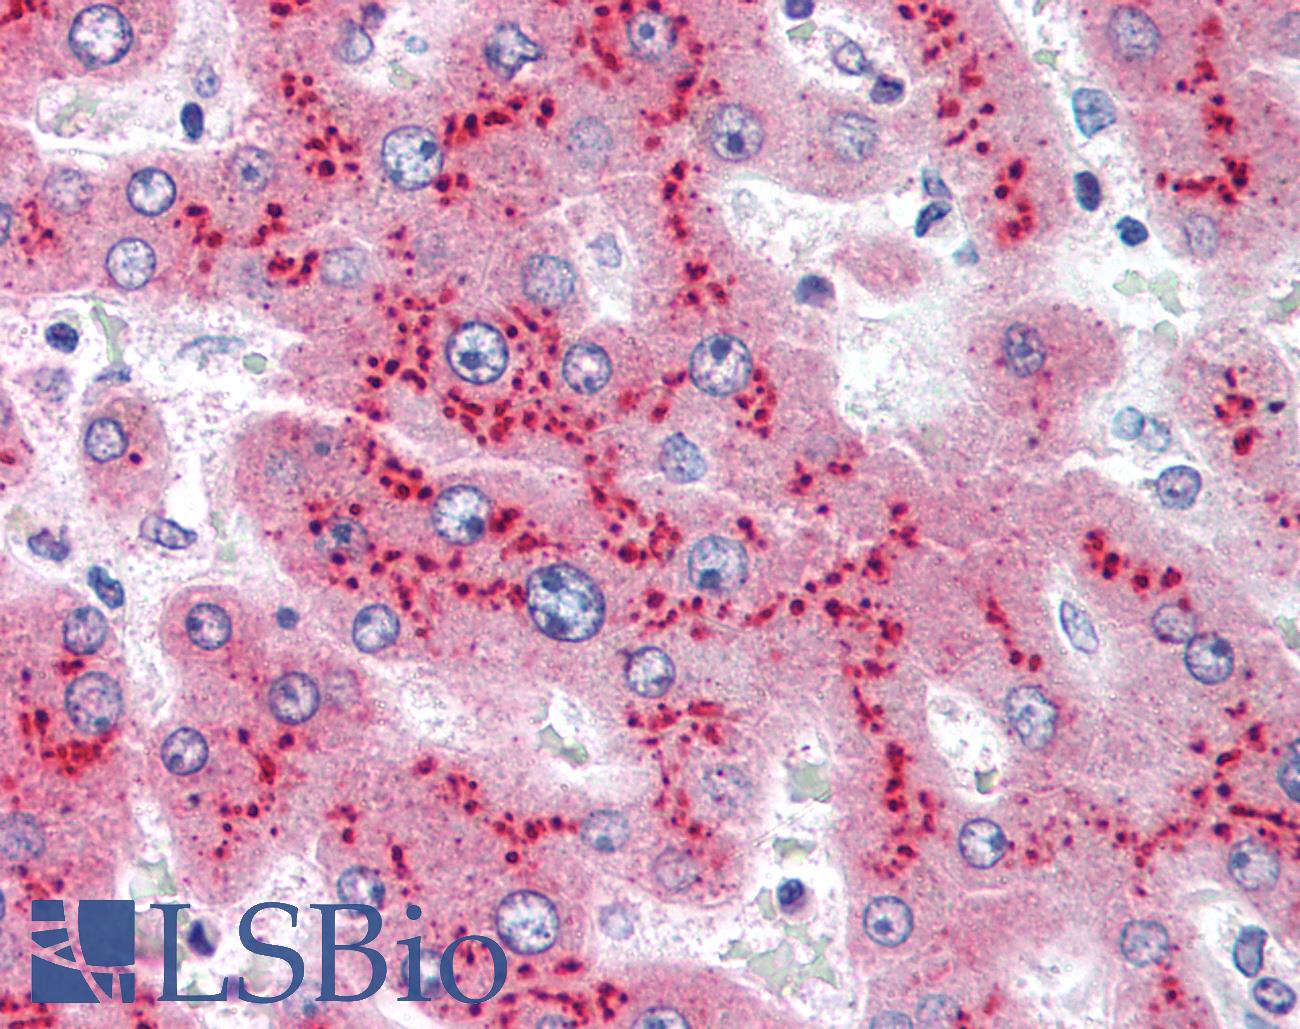 SAA1 / SAA / Serum Amyloid A Antibody - Anti-SAA1 / Serum Amyloid A antibody IHC of human liver. Immunohistochemistry of formalin-fixed, paraffin-embedded tissue after heat-induced antigen retrieval. Antibody concentration 5 ug/ml.